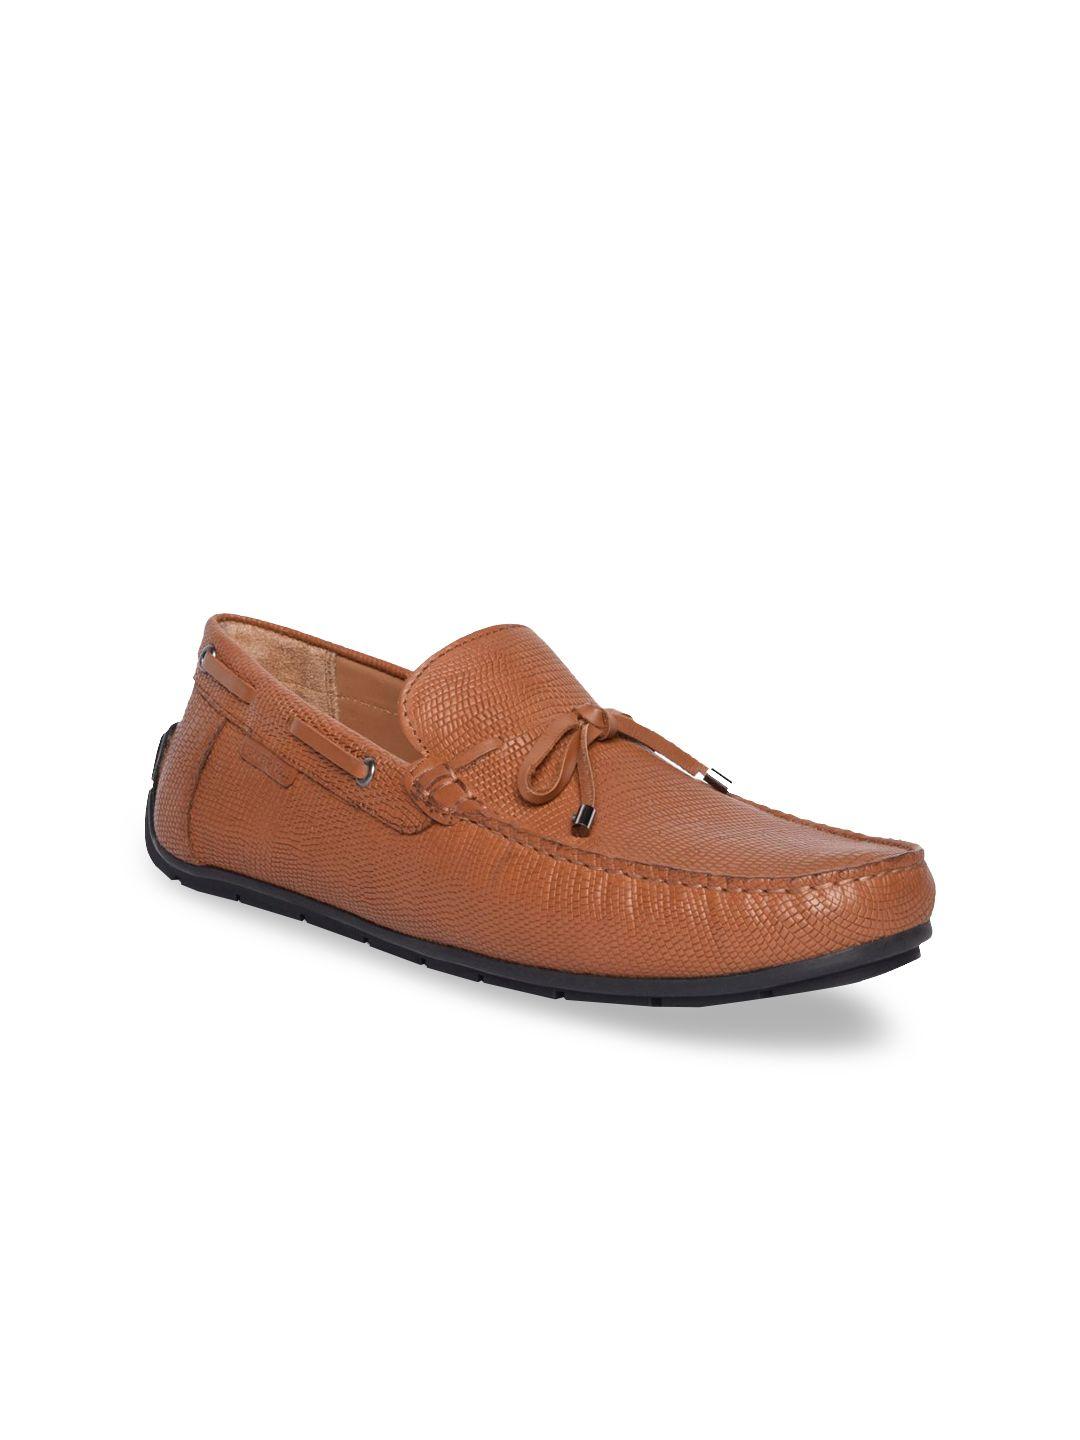 kenneth-cole-men-tan-brown-driving-shoes